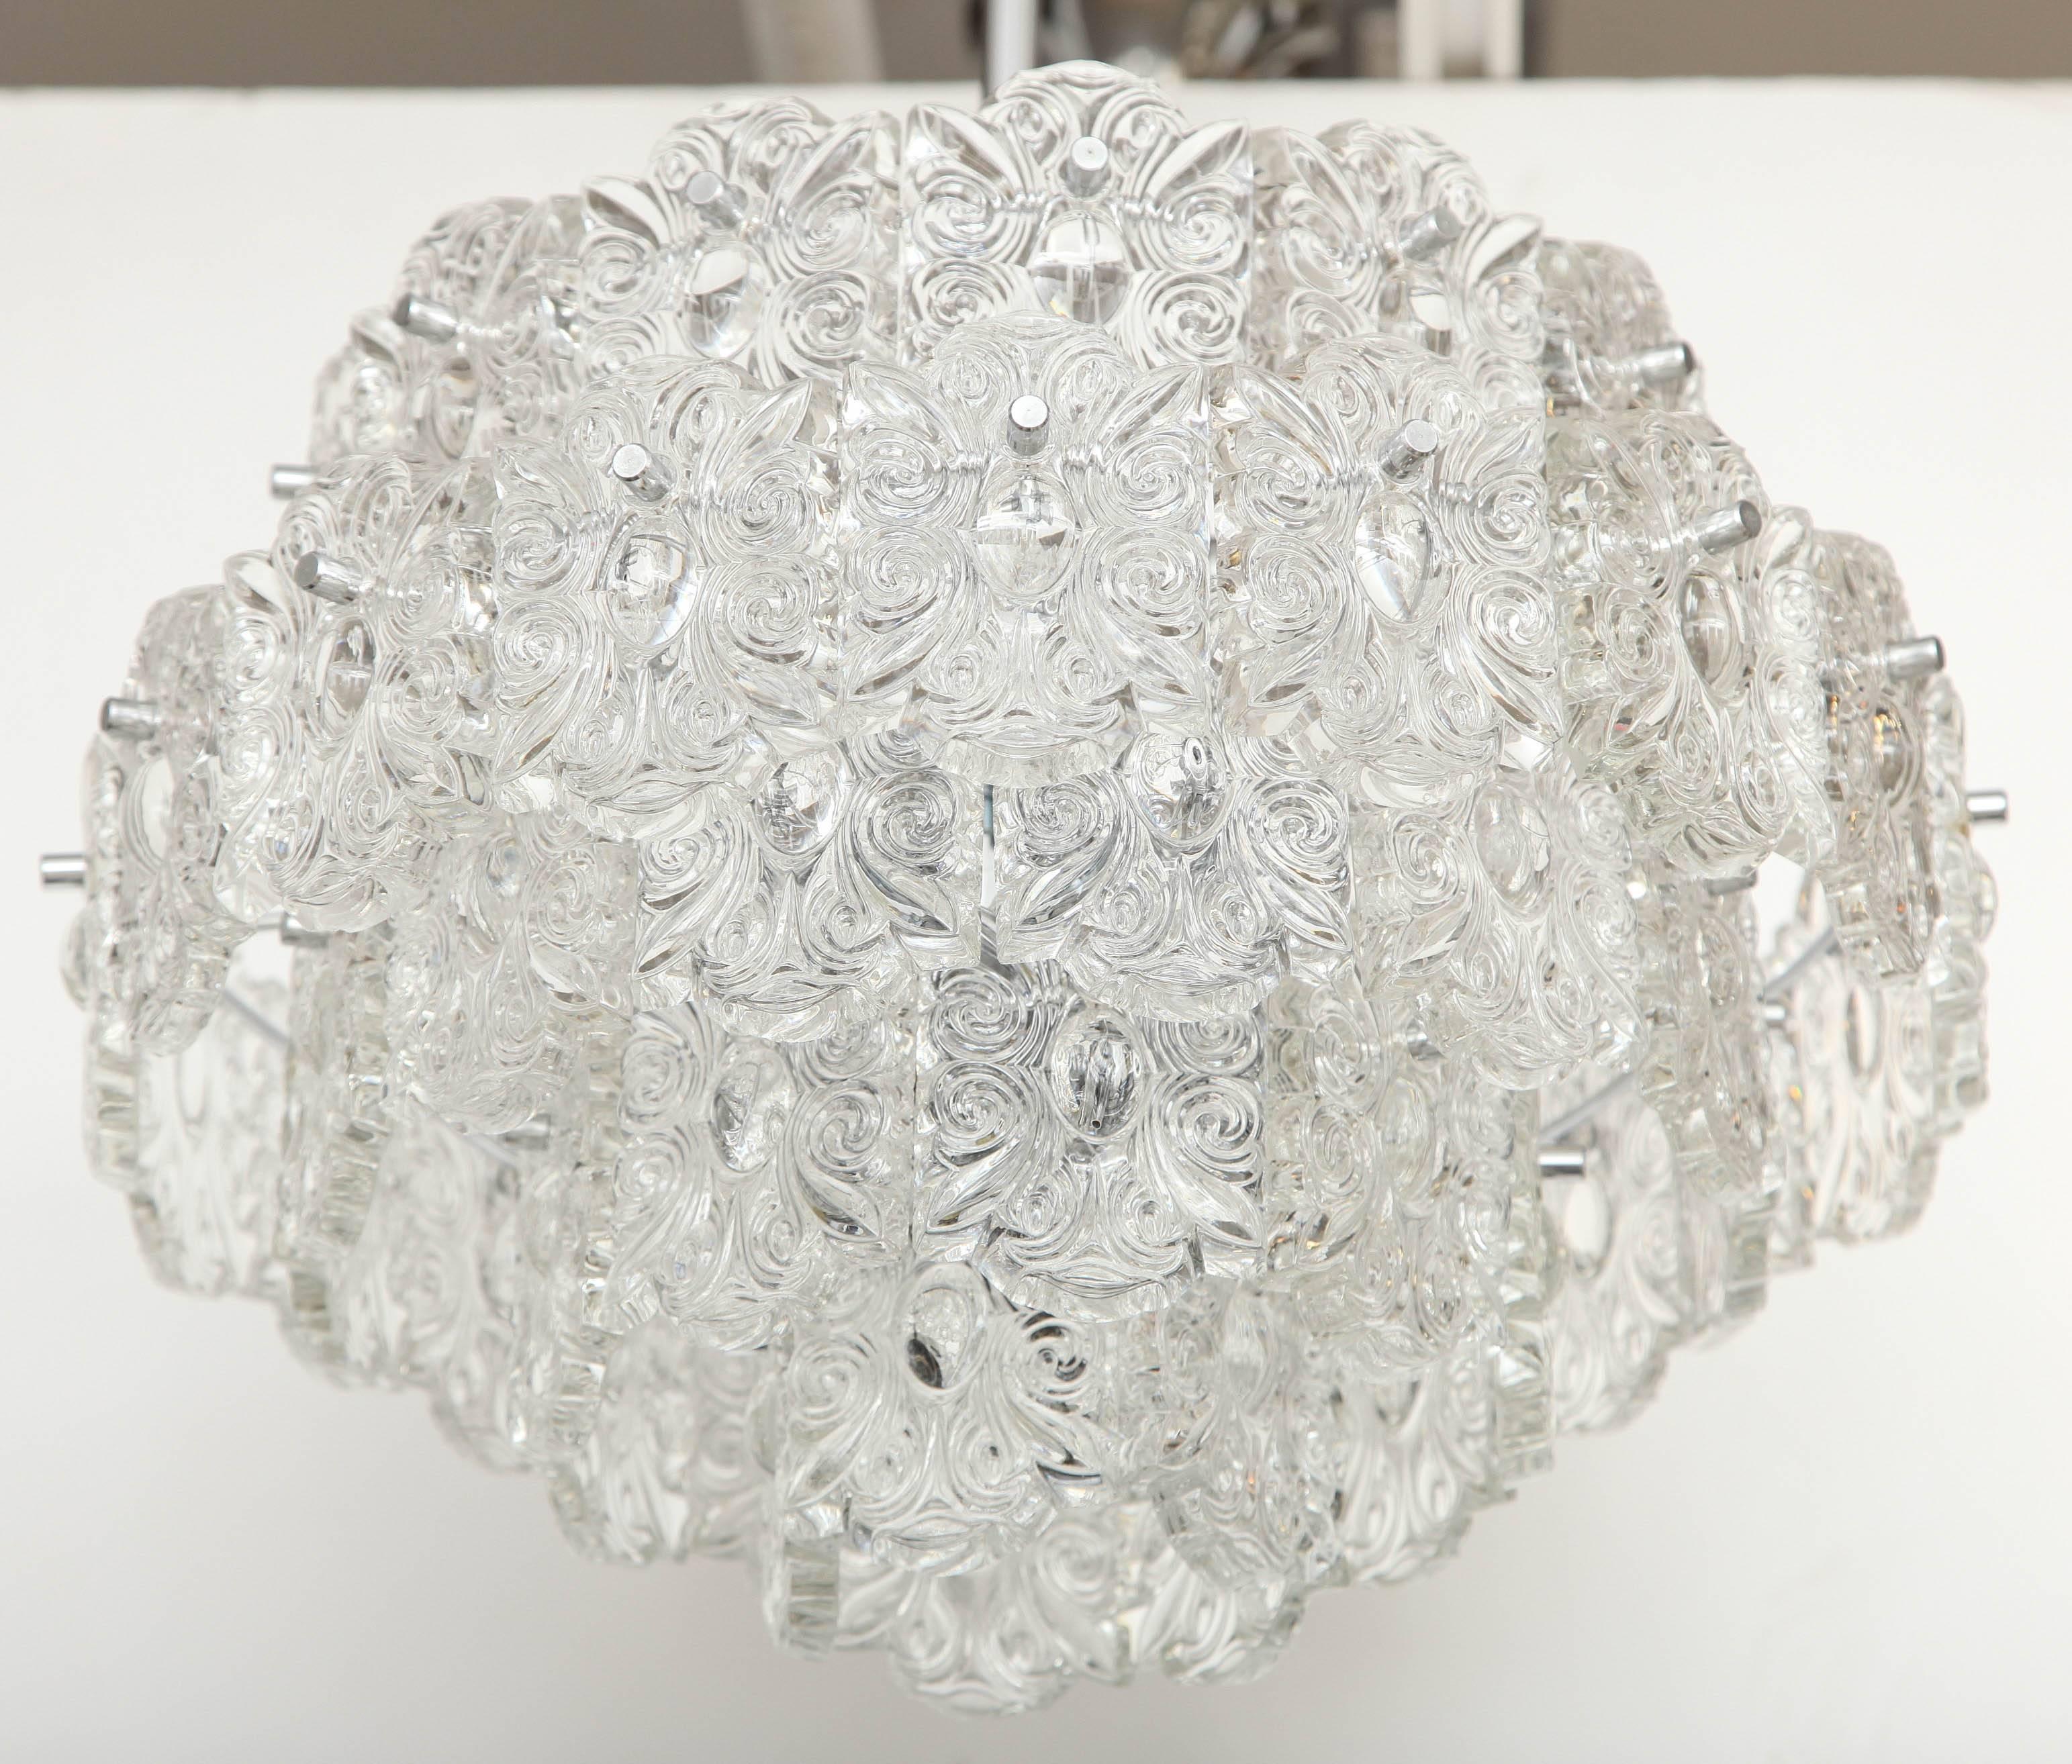 Striking Mid-Century chandelier composed of five tiers of crystal elements with a scroll design. Chandelier suspended from a nickel canopy and rod. Currently two are available. Rewired for use in the USA.

Chandelier body measures 12